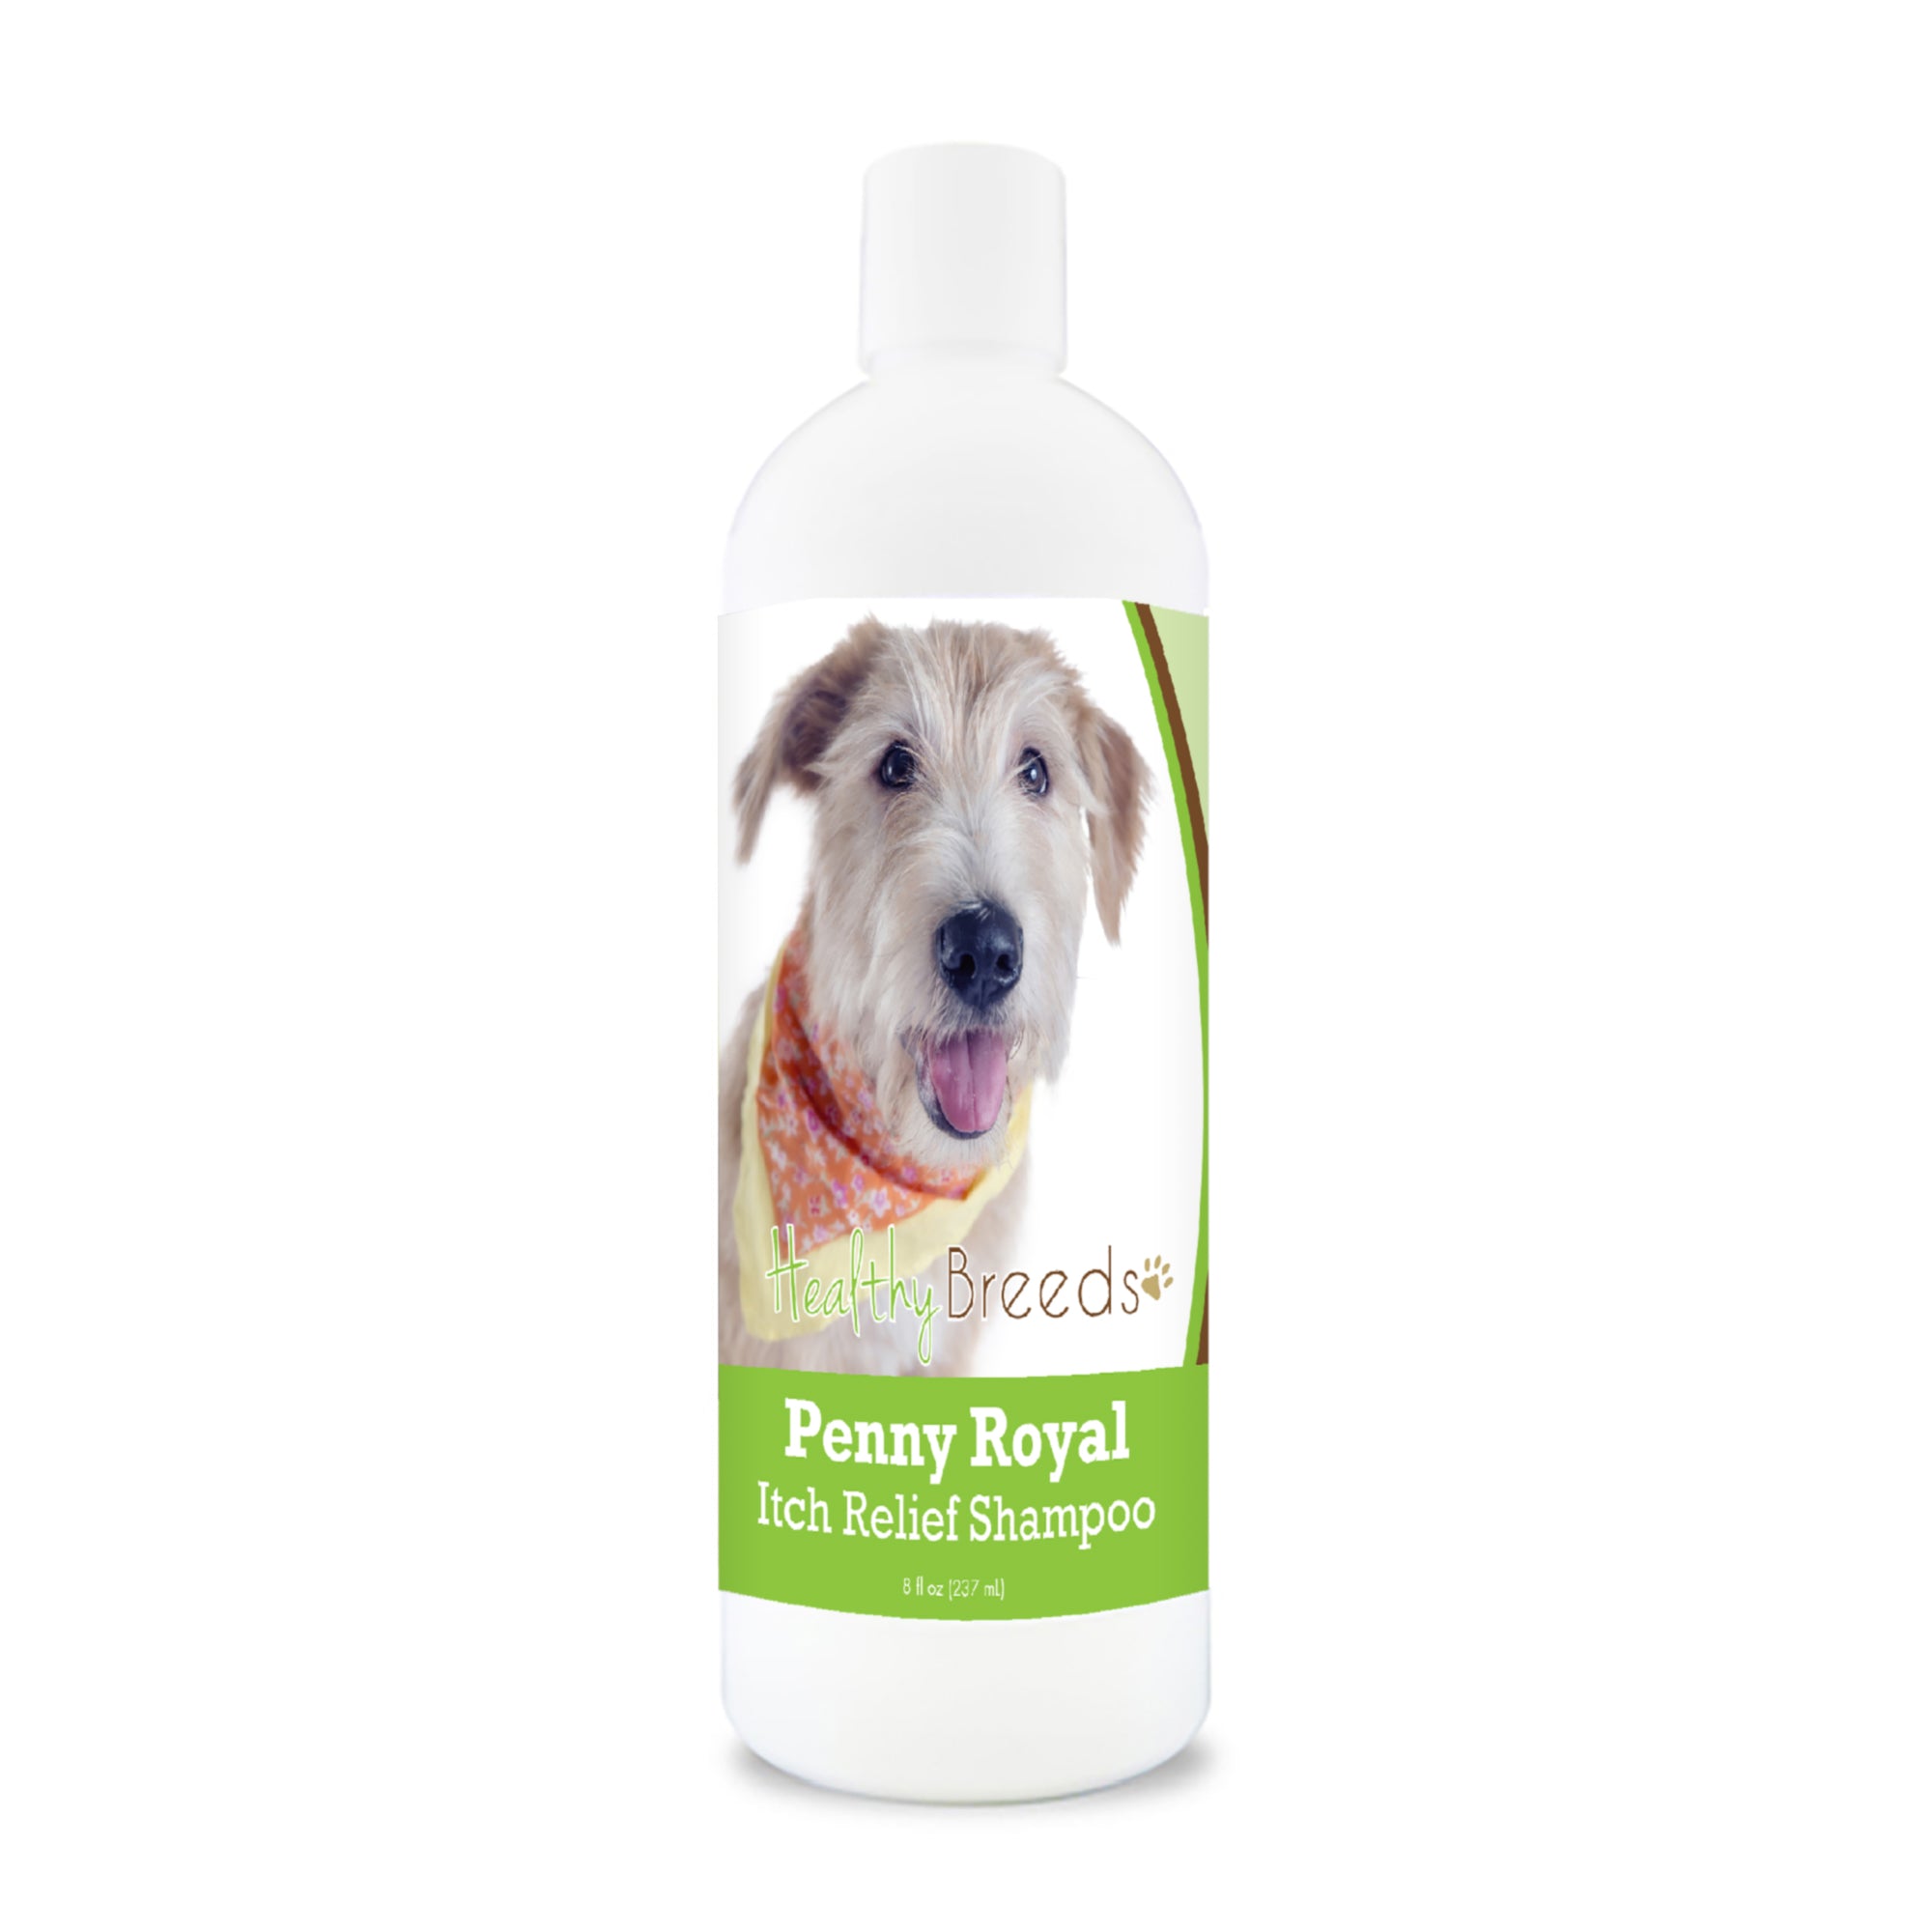 Glen of Imaal Terrier Penny Royal Itch Relief Shampoo 8 oz